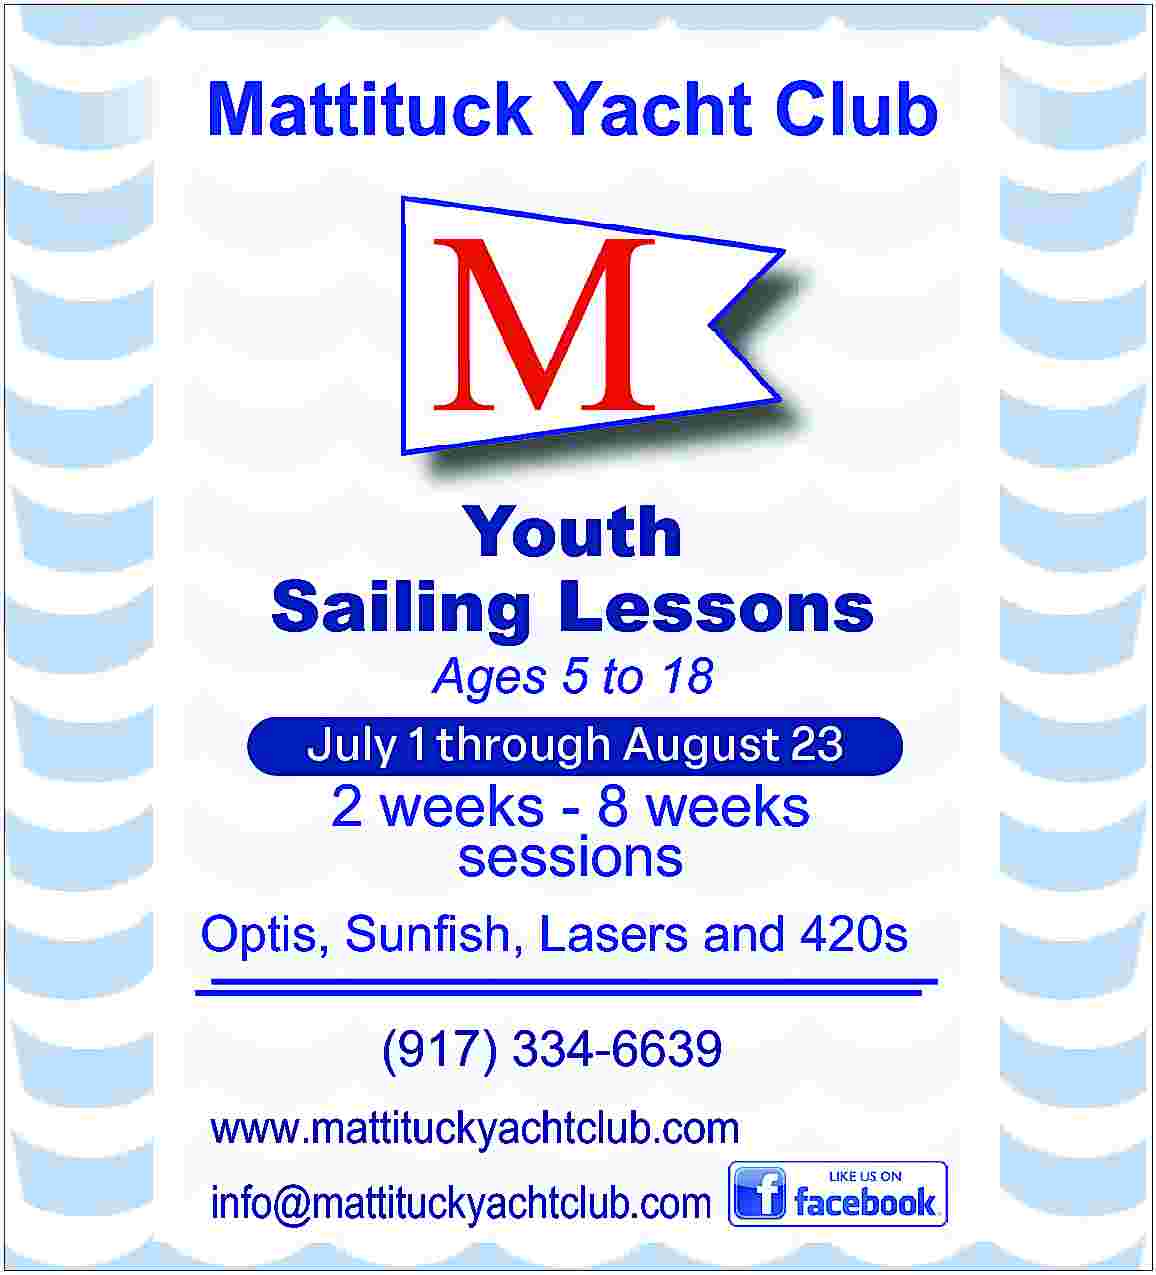 Mattituck Yacht Club <br> <br>Youth  Mattituck Yacht Club    Youth  Sailing Lessons    Ages 5 to 18  June 26 through August 18    2 weeks - 8 weeks  sessions    Optis, Sunfish, Lasers and 420s  (917) 334-6639  www.mattituckyachtclub.com  info@mattituckyachtclub.com     